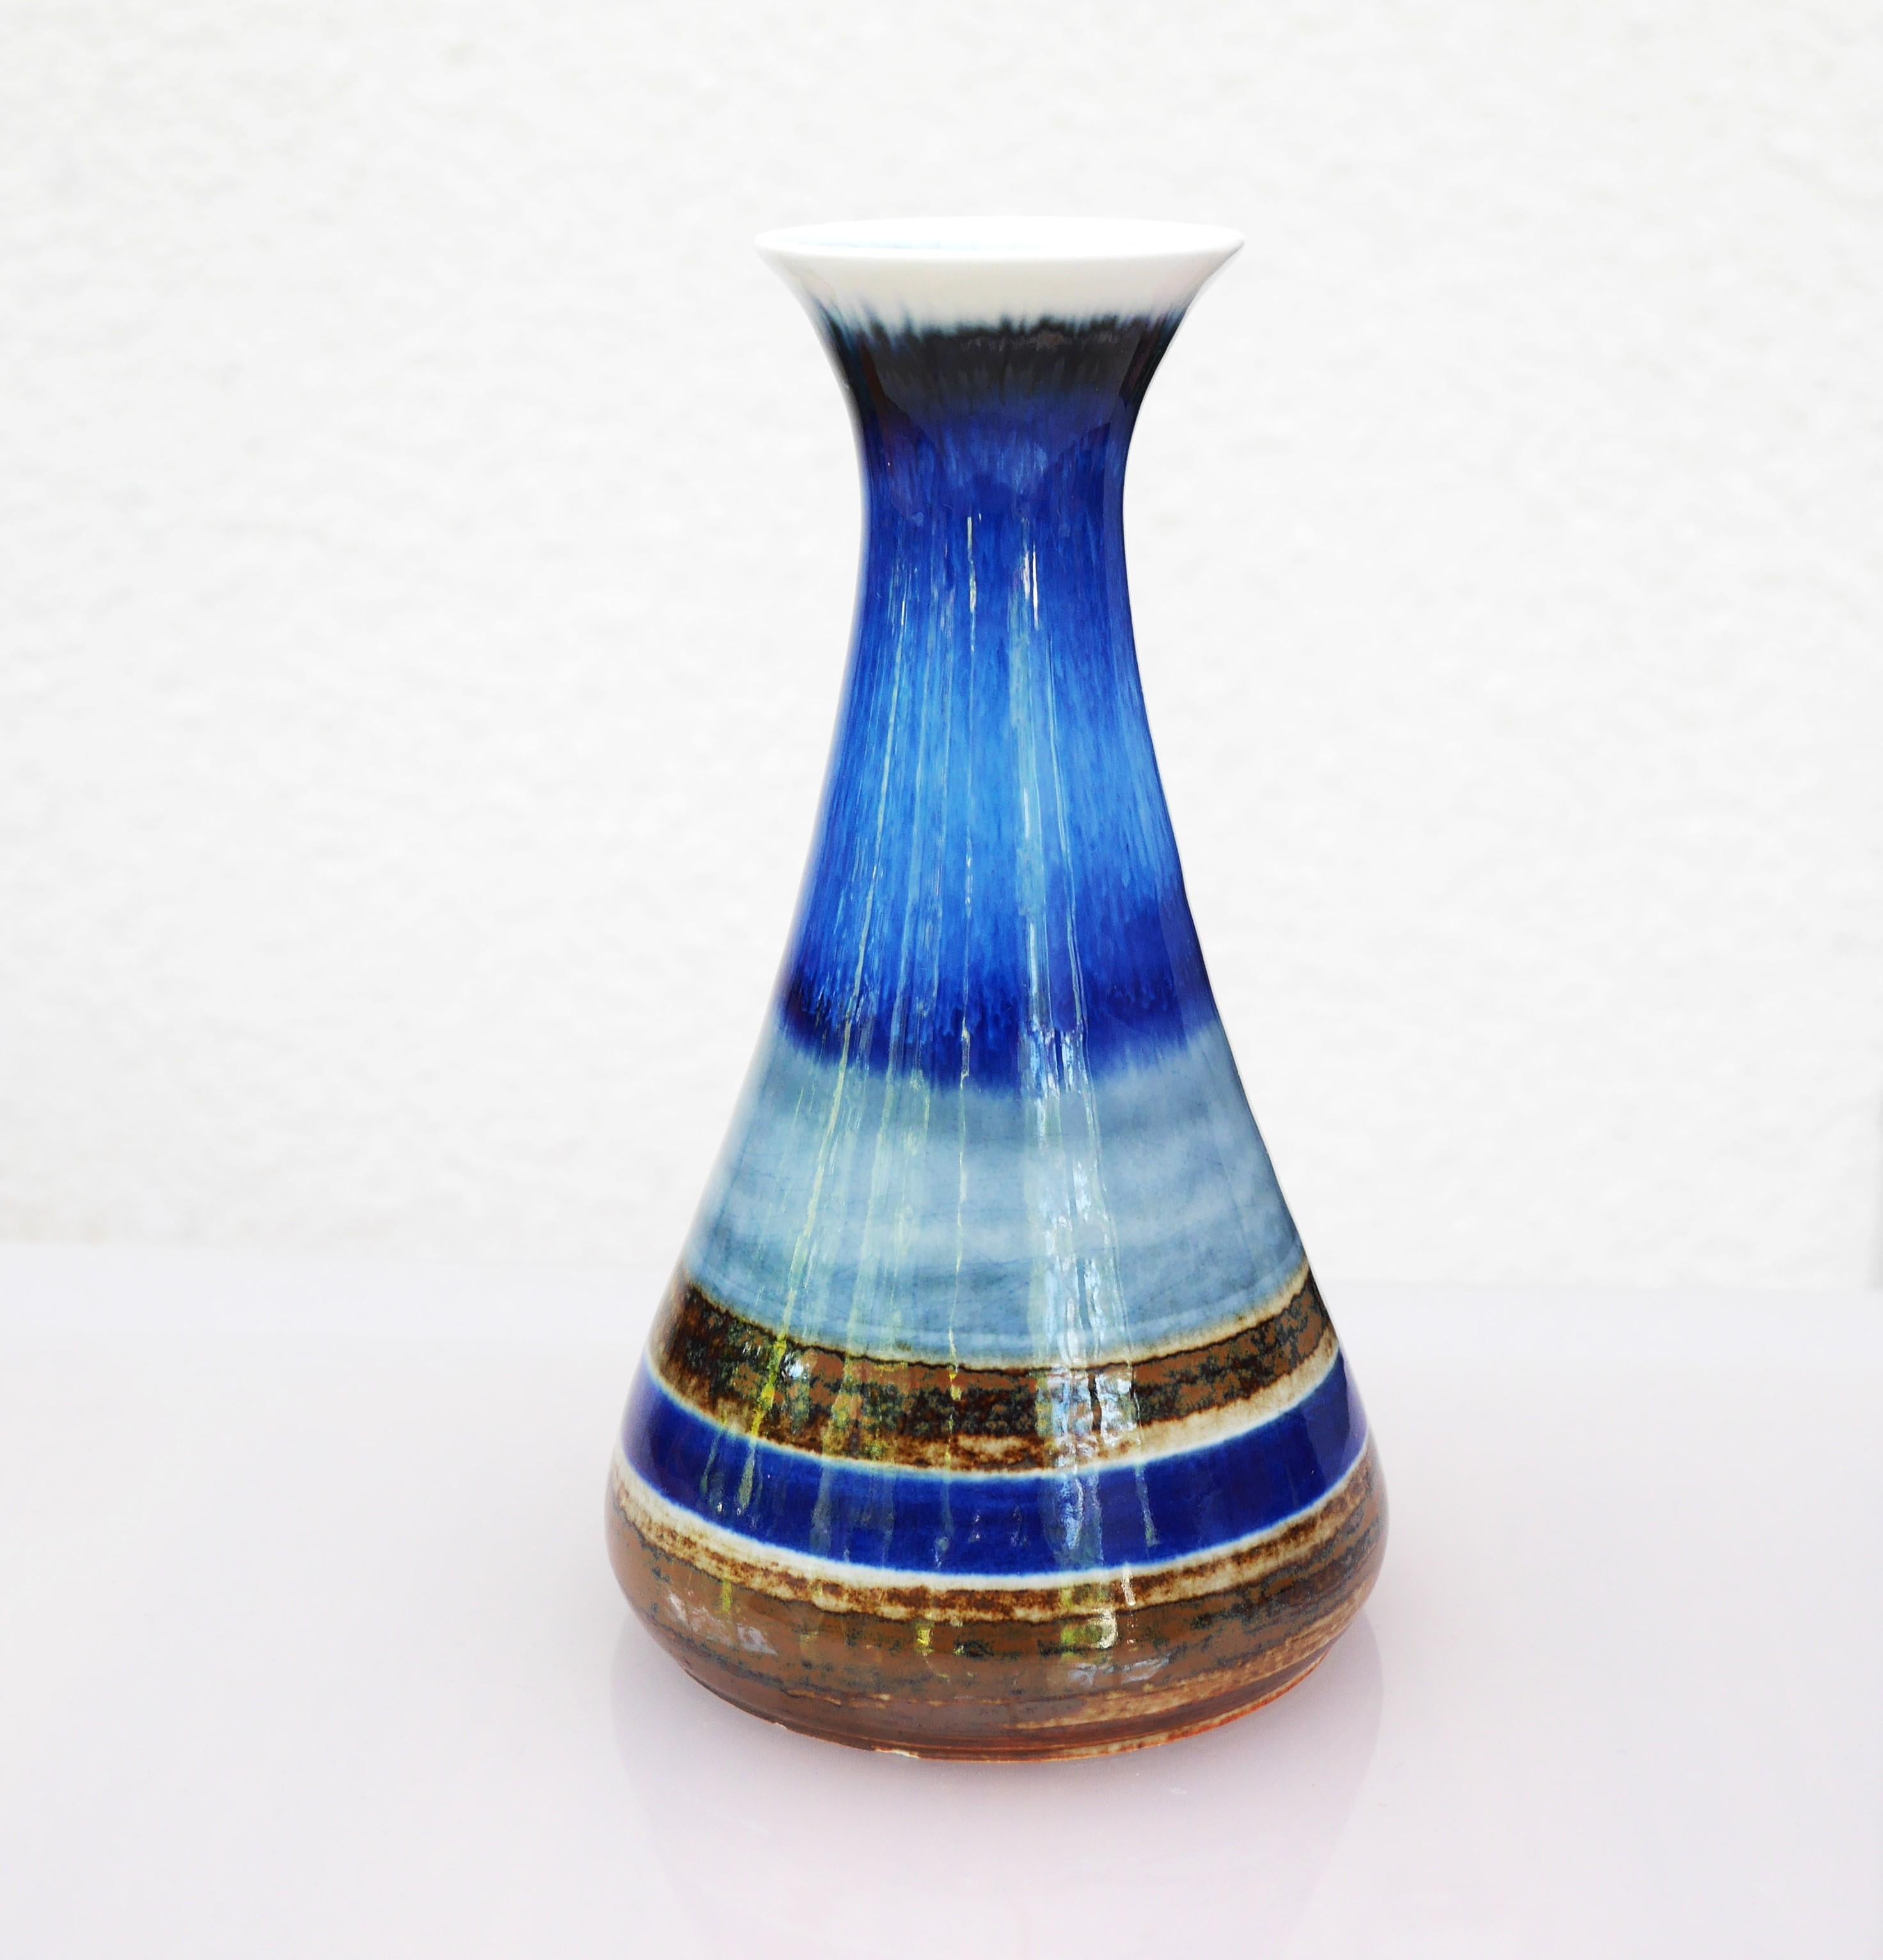 Hand-Painted Mid-century modern pottery vase by G. Millberg for Rörstrand, Sweden. For Sale